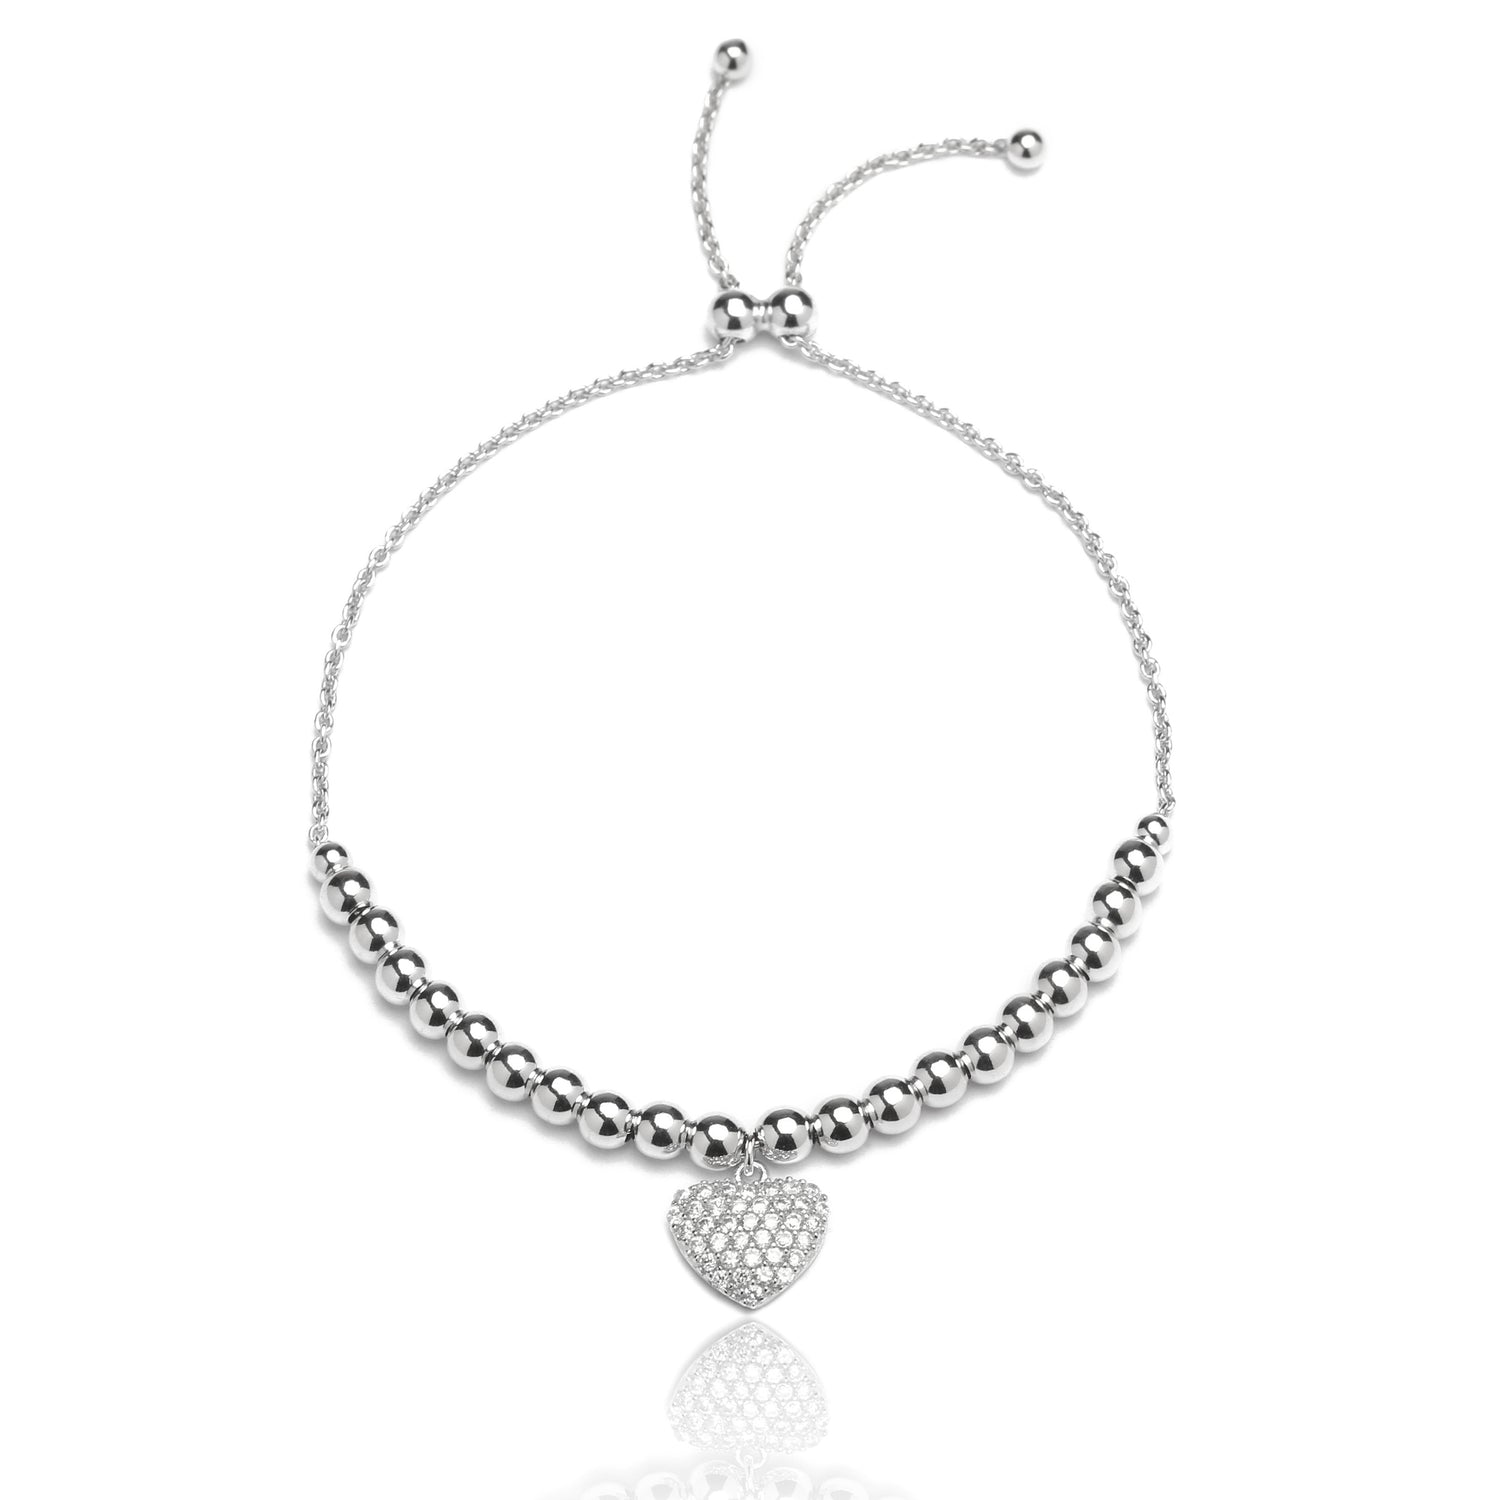 Sterling Silver Adjustable Bracelet with Cubic Zirconia Heart Charm and Beads